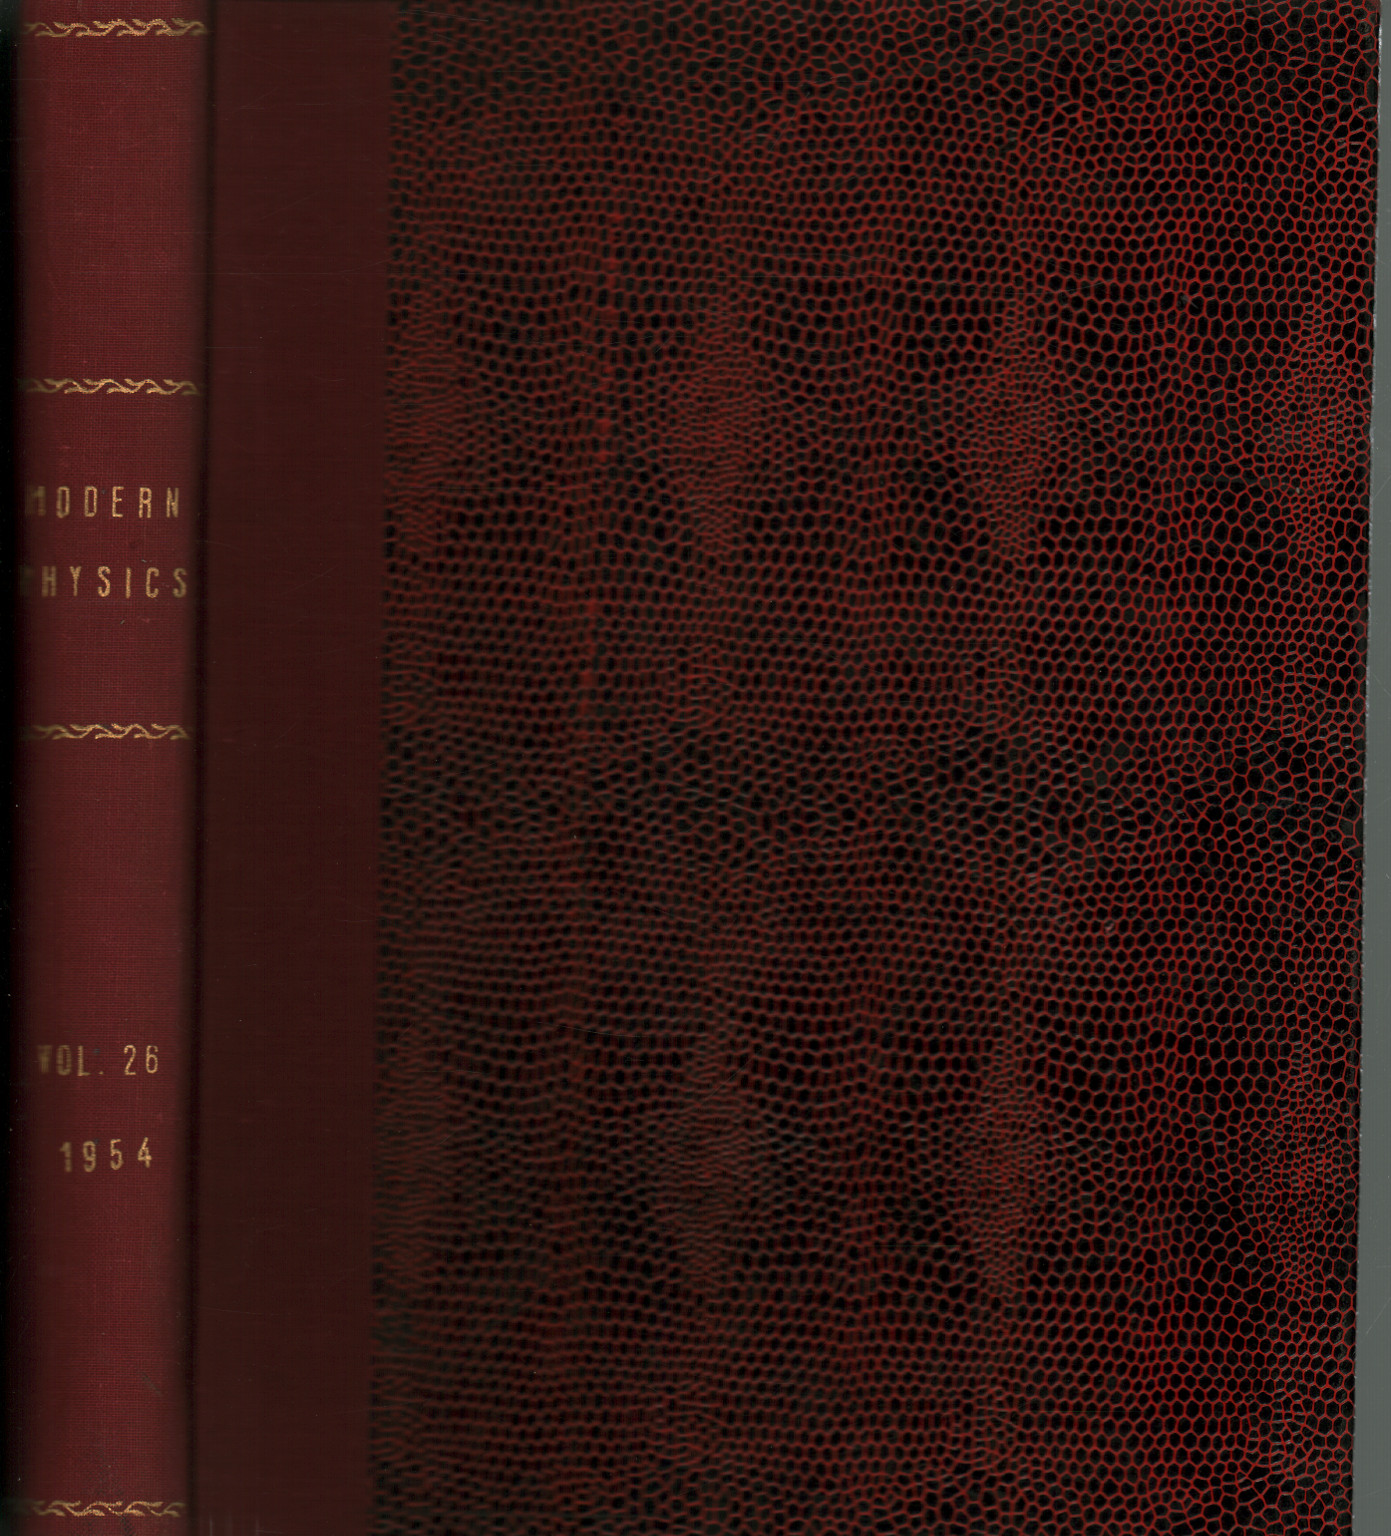 Reviews of Modern Physics, 1954. Volume 26, 1-4 , s.a.